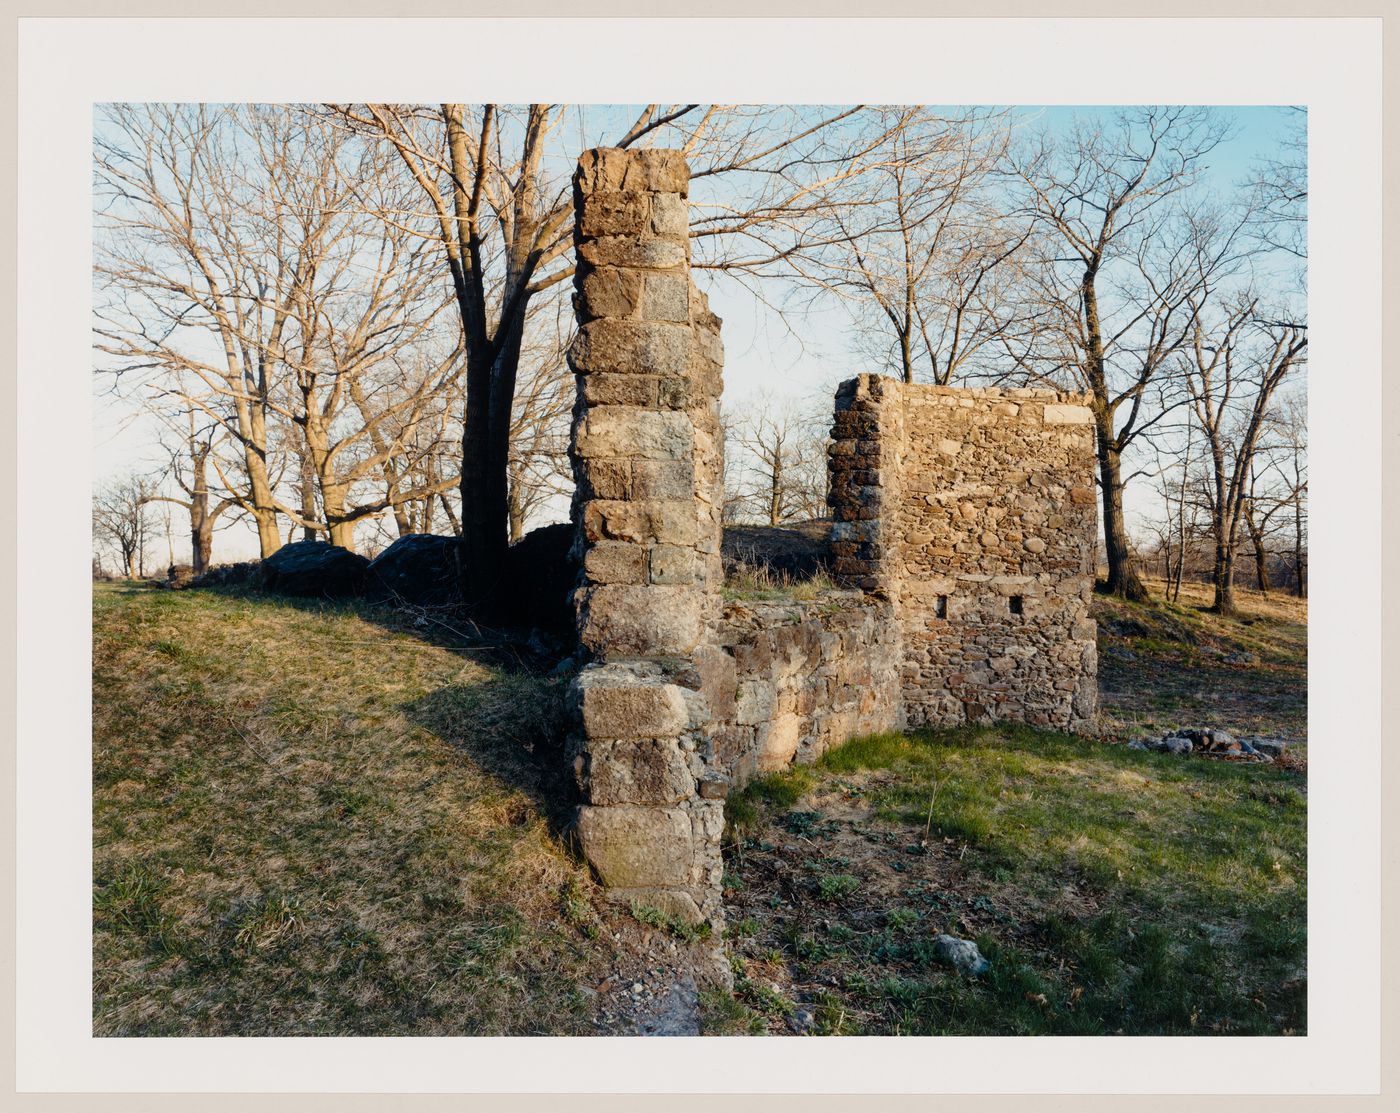 Viewing Olmsted: View of Stone Wall, Franklin Park, Boston, Massachusetts